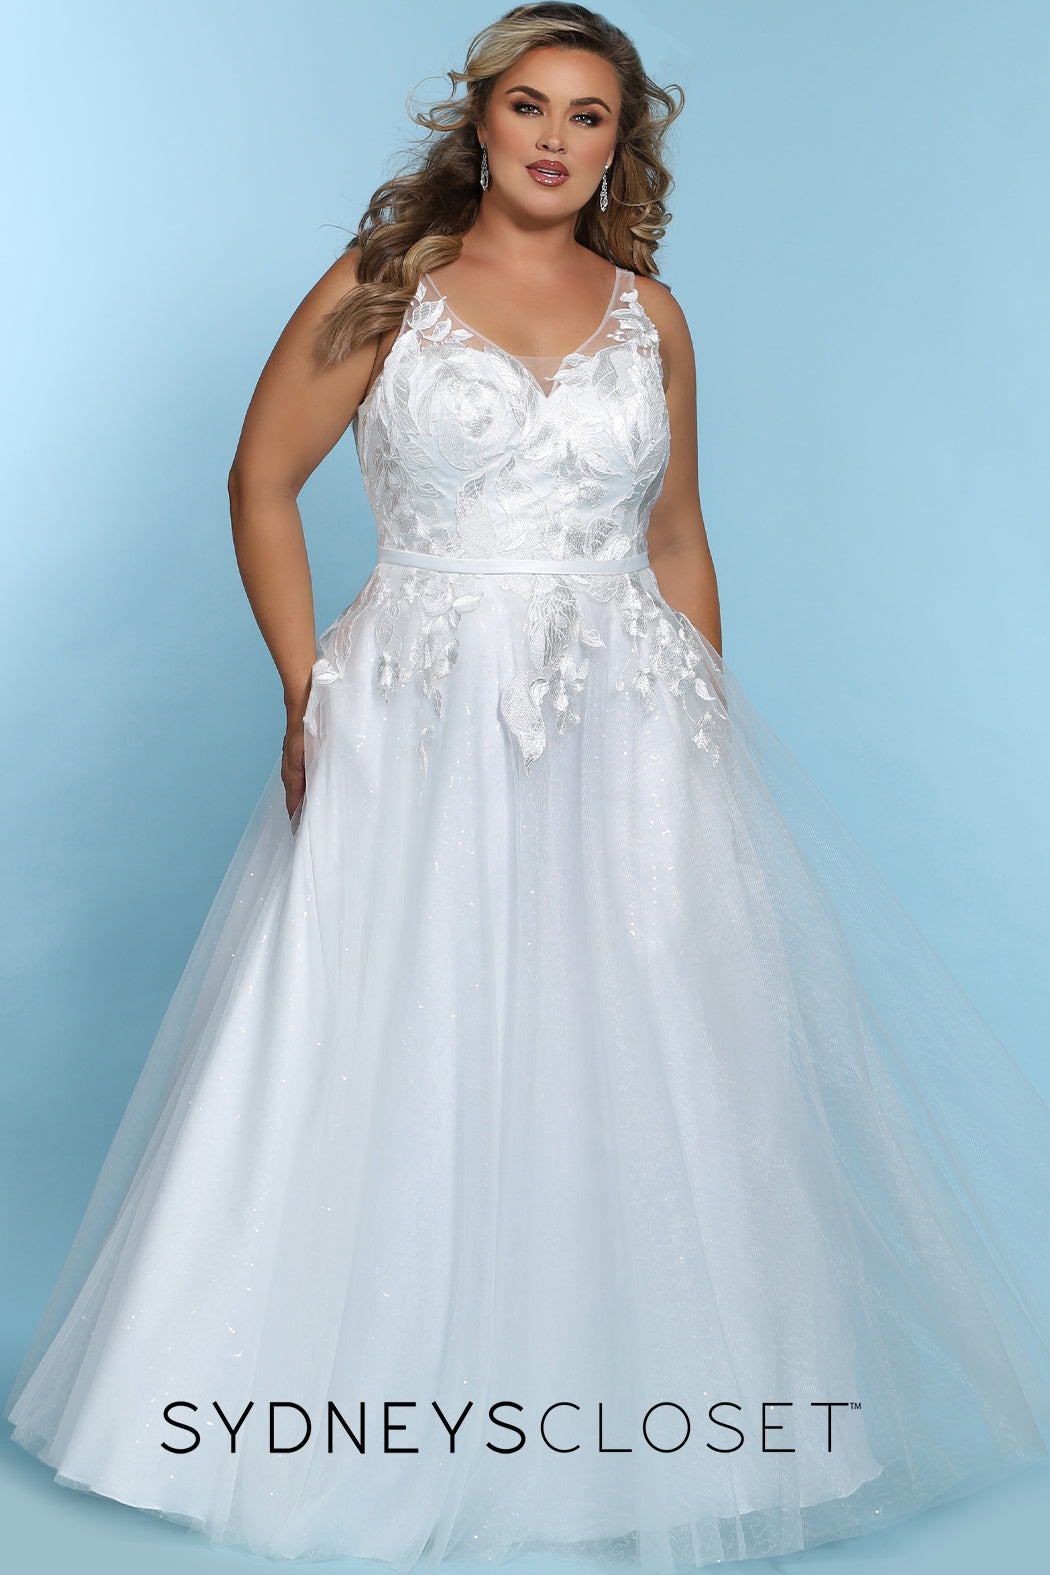 Plus Size Ball Gown, Princess Bridal Gowns